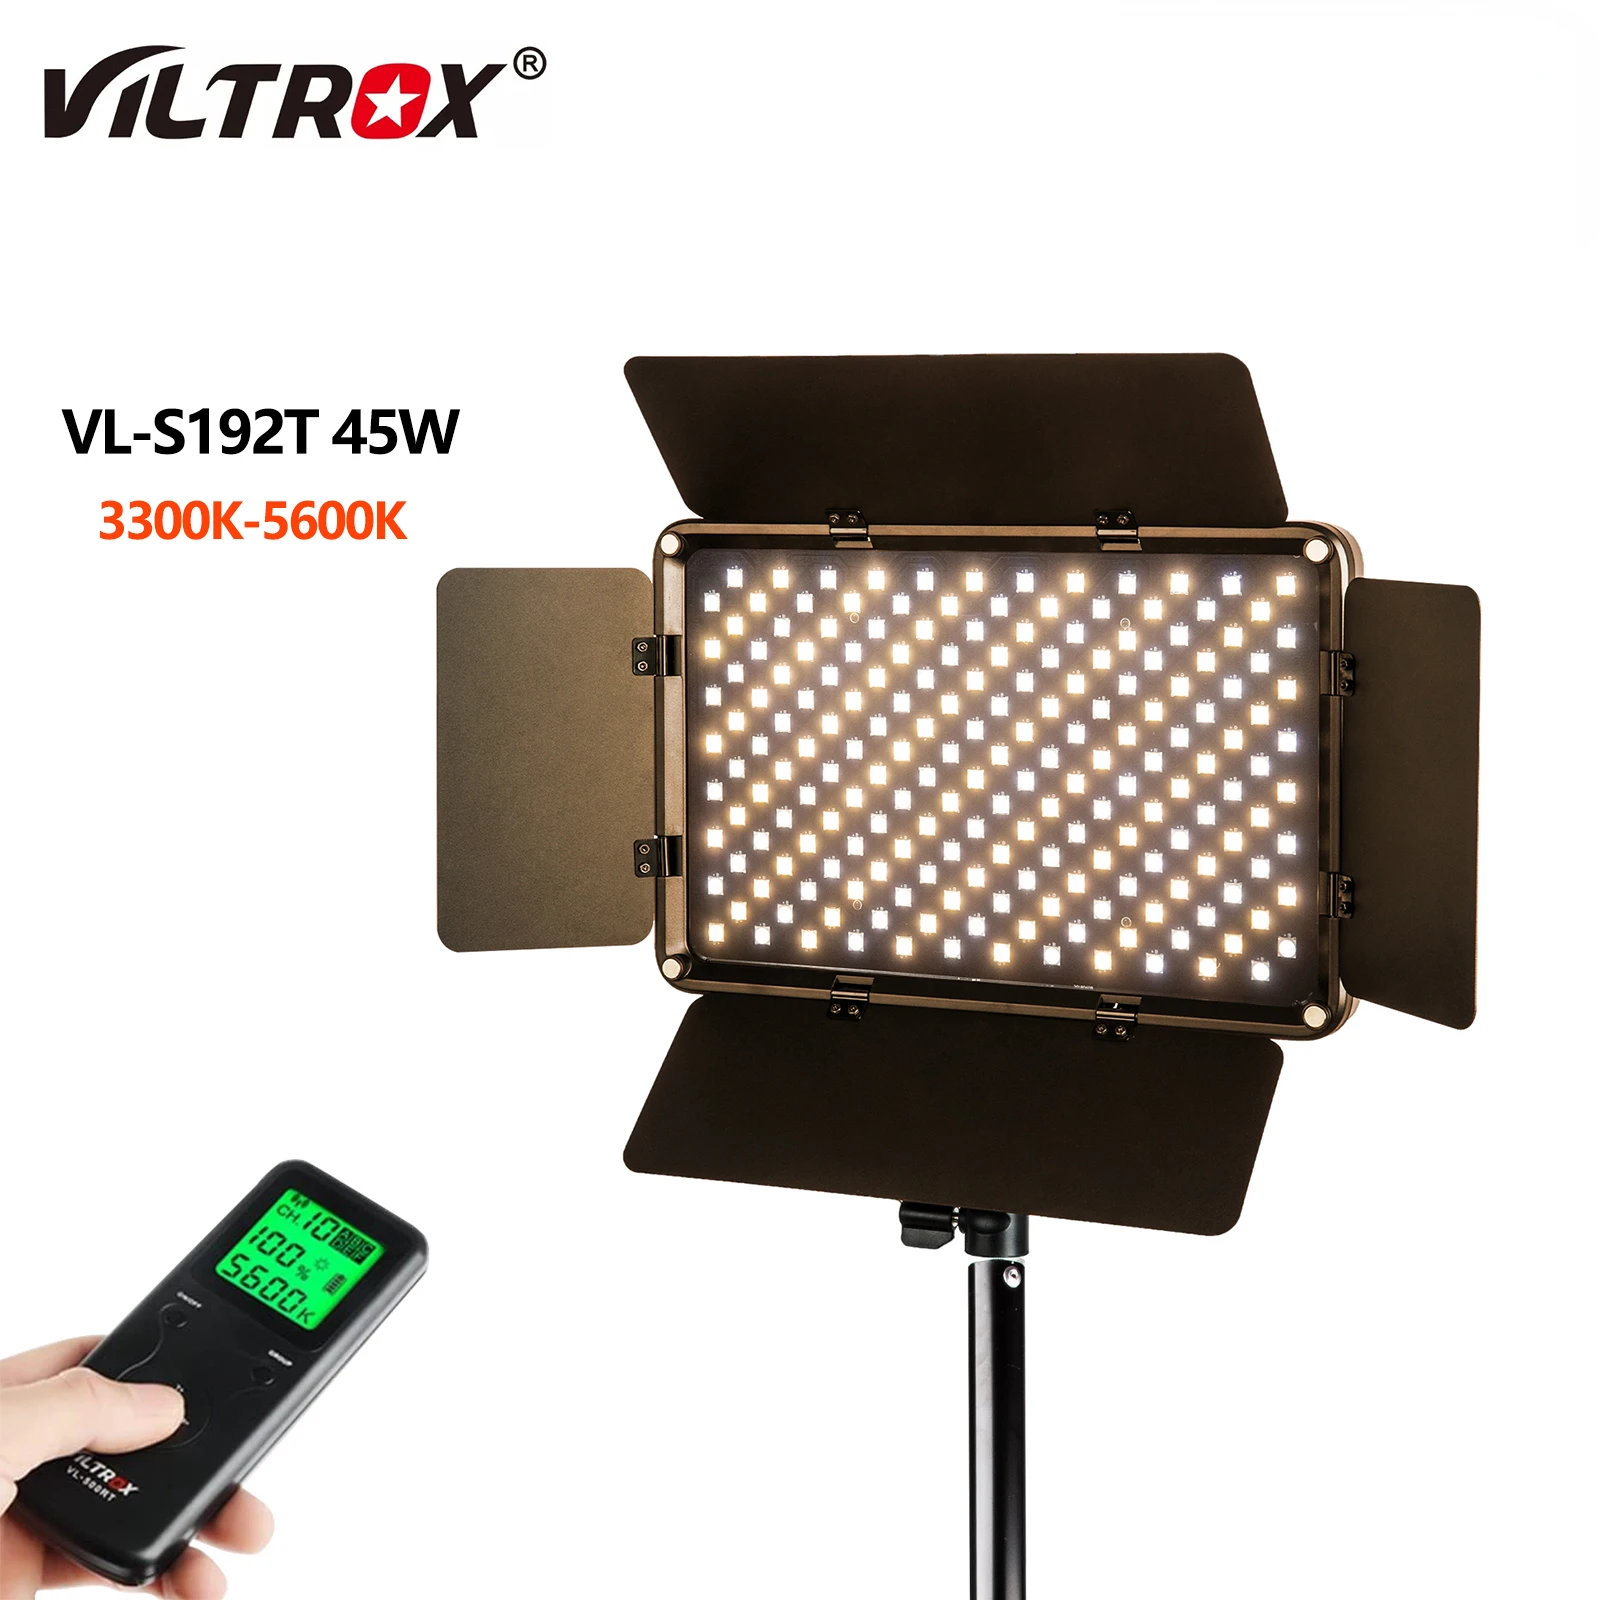 

Viltrox VL-S192T 45W Bi-color Dimmable Wireless Video LED Light Remote Panel Light For Camera Photo Studio Shooting YouTube Live